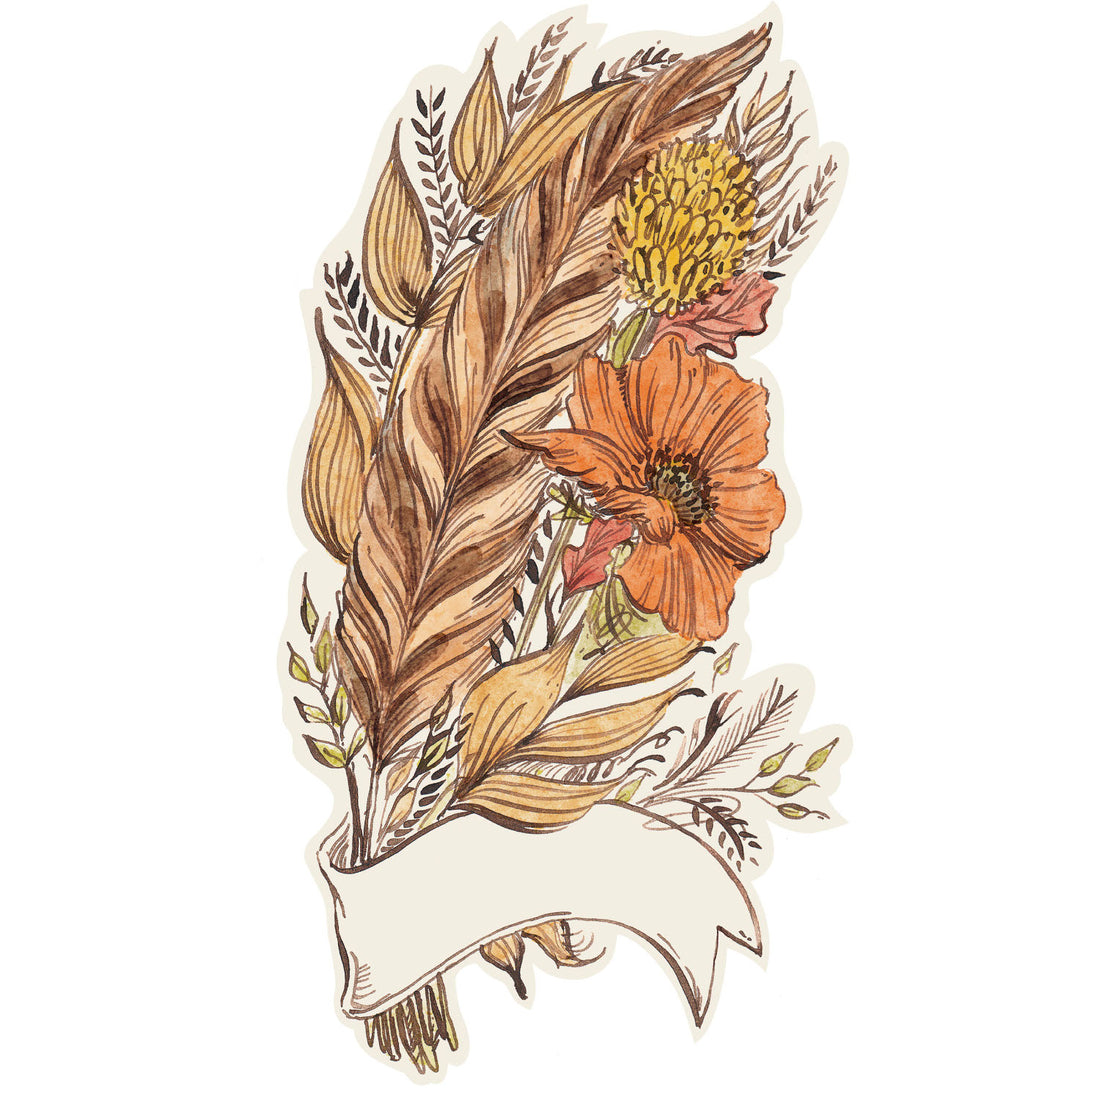 A die-cut illustration of a feather and fall foliage in brown, orange and yellow, wrapped in a white ribbon that&